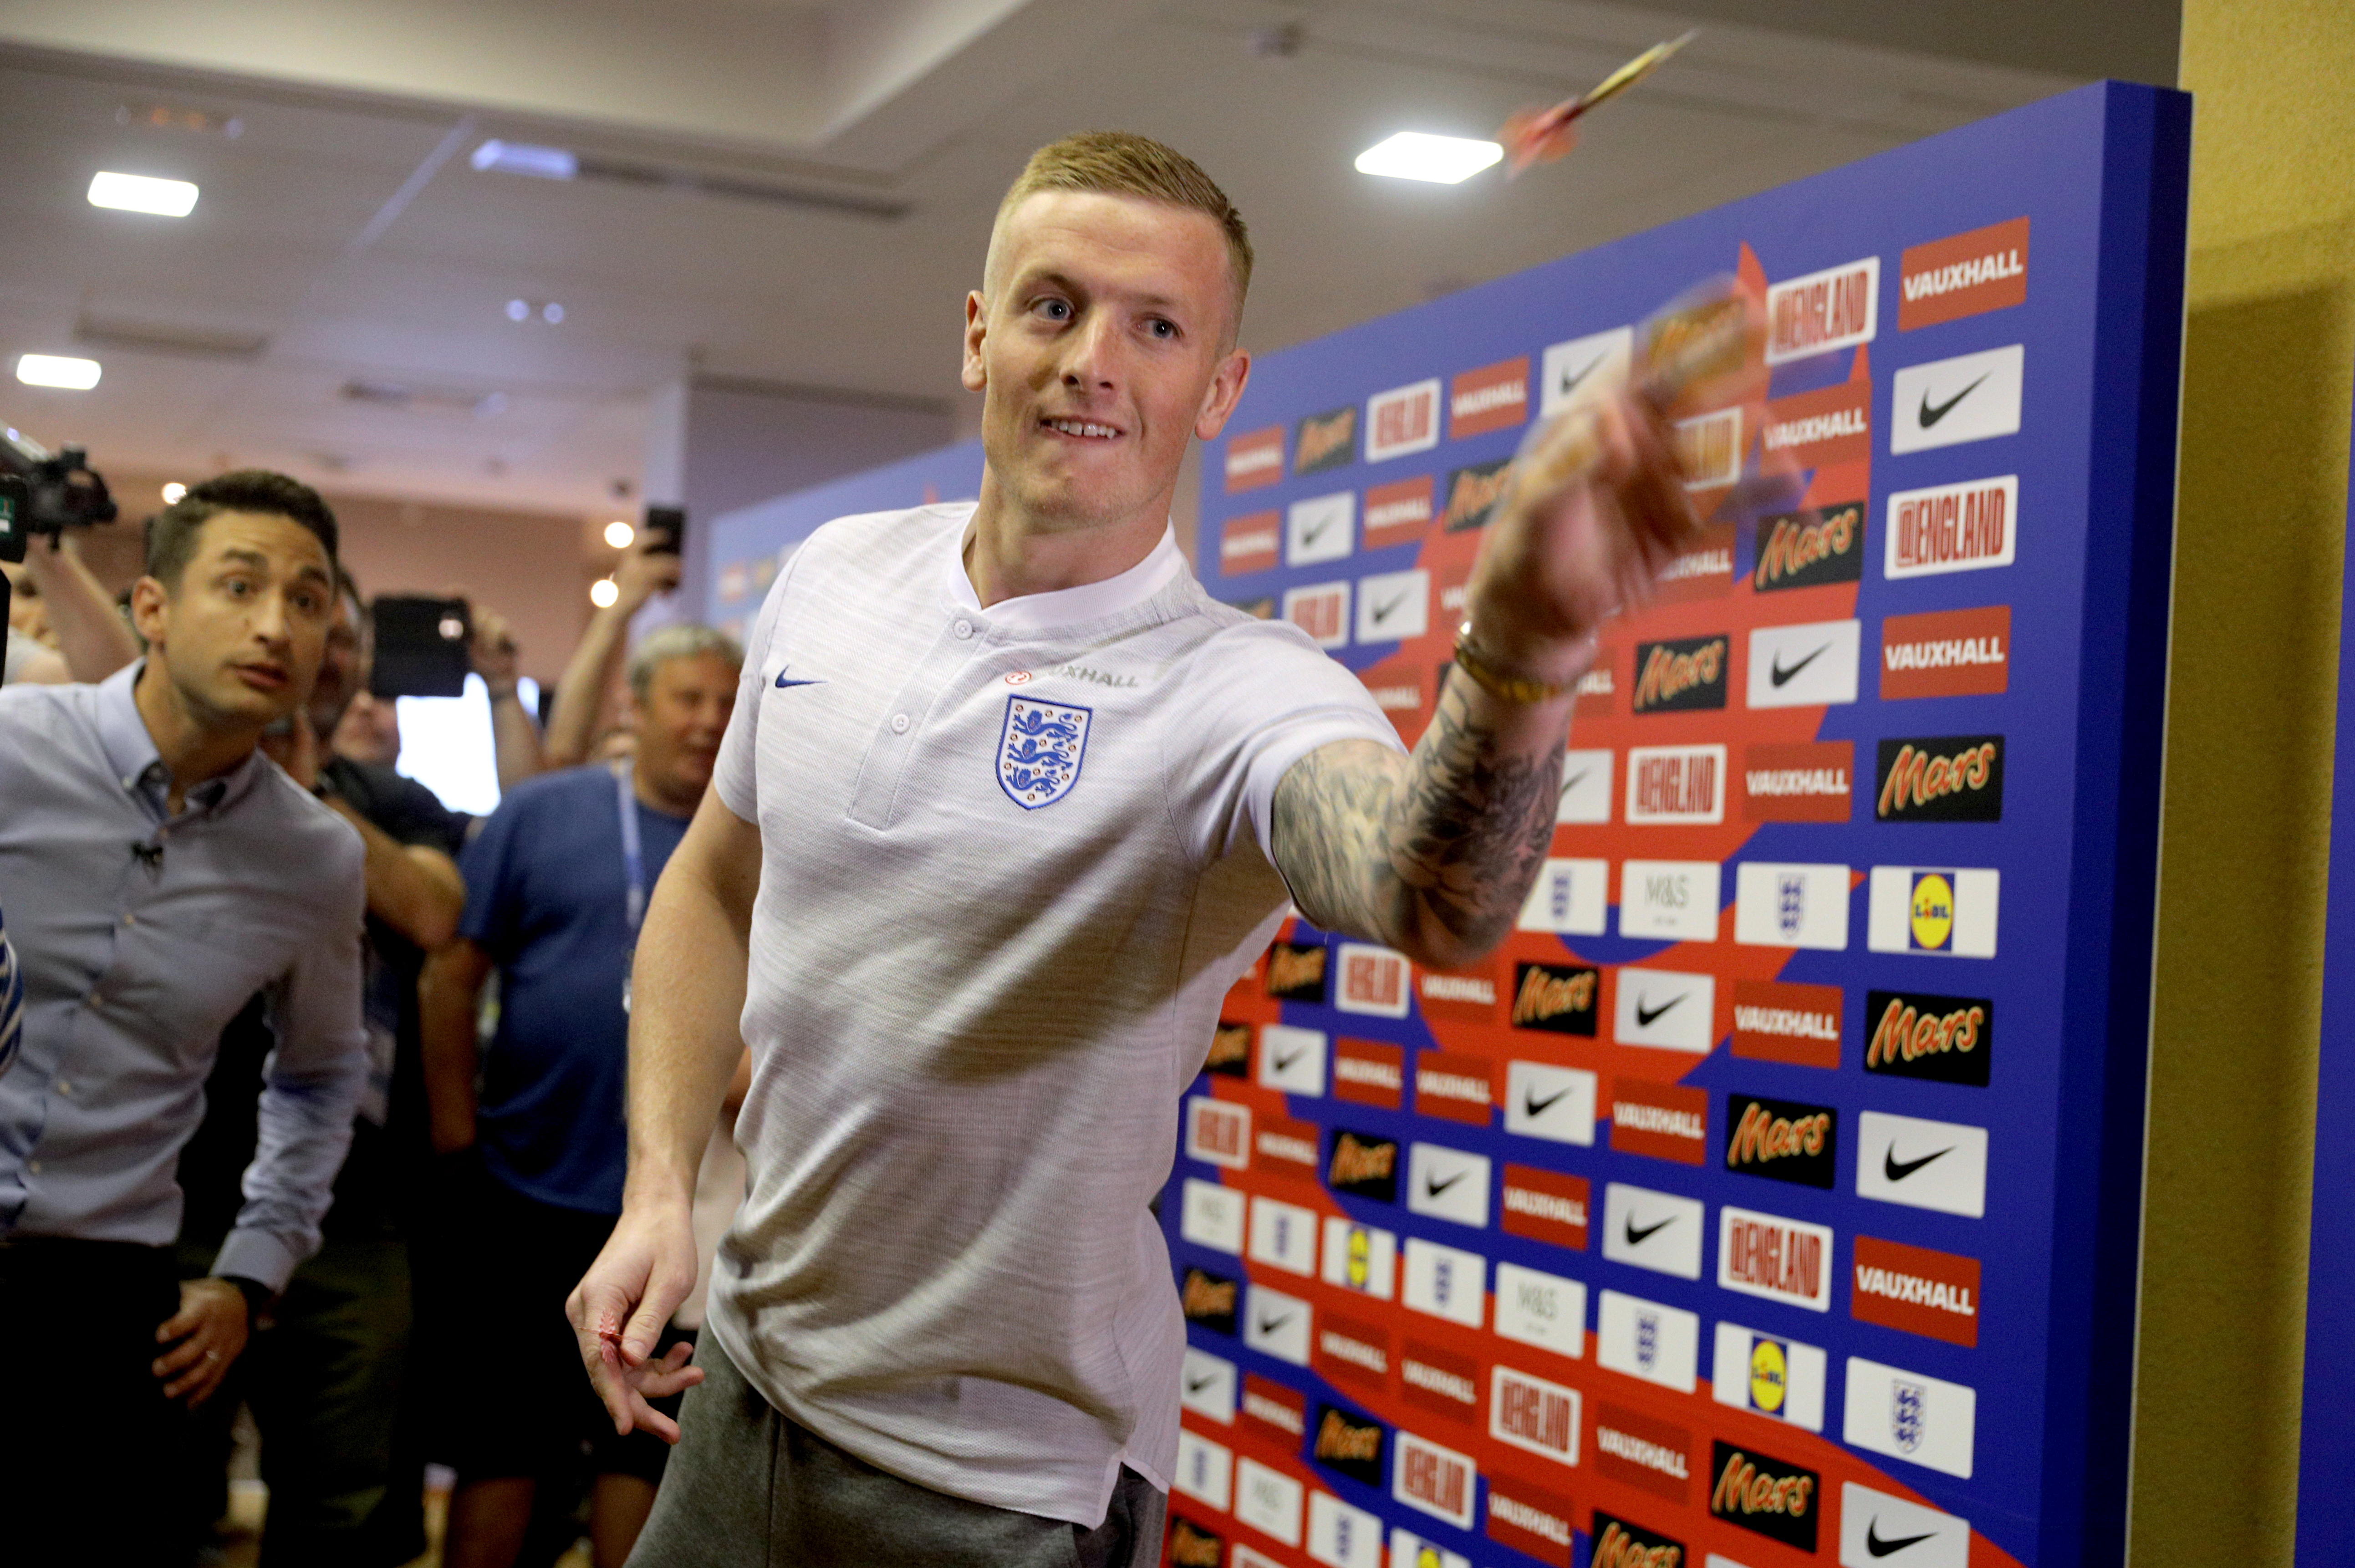 England's Jordan Pickford plays darts during a press conference